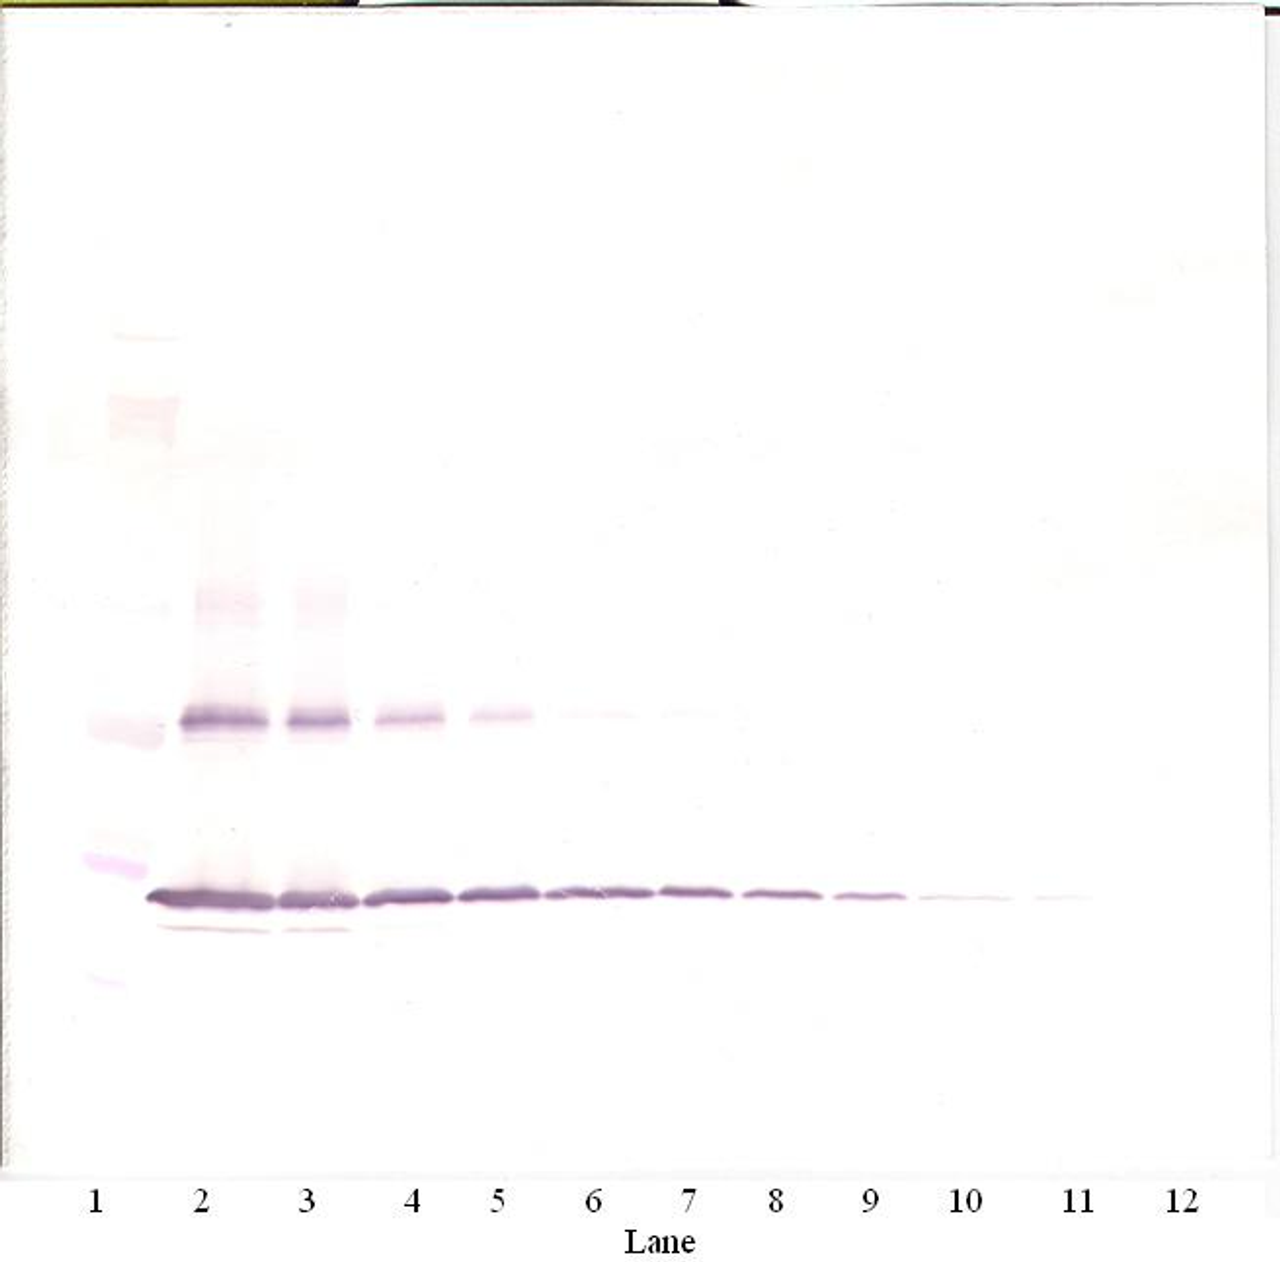 To detect mIL-1-beta by Western Blot analysis this antibody can be used at a concentration of 0.1-0.2 ug/ml. Used in conjunction with compatible secondary reagents the detection limit for recombinant mIL-1-beta is 1.5-3.0 ng/lane, under either reducing or non-reducing conditions.